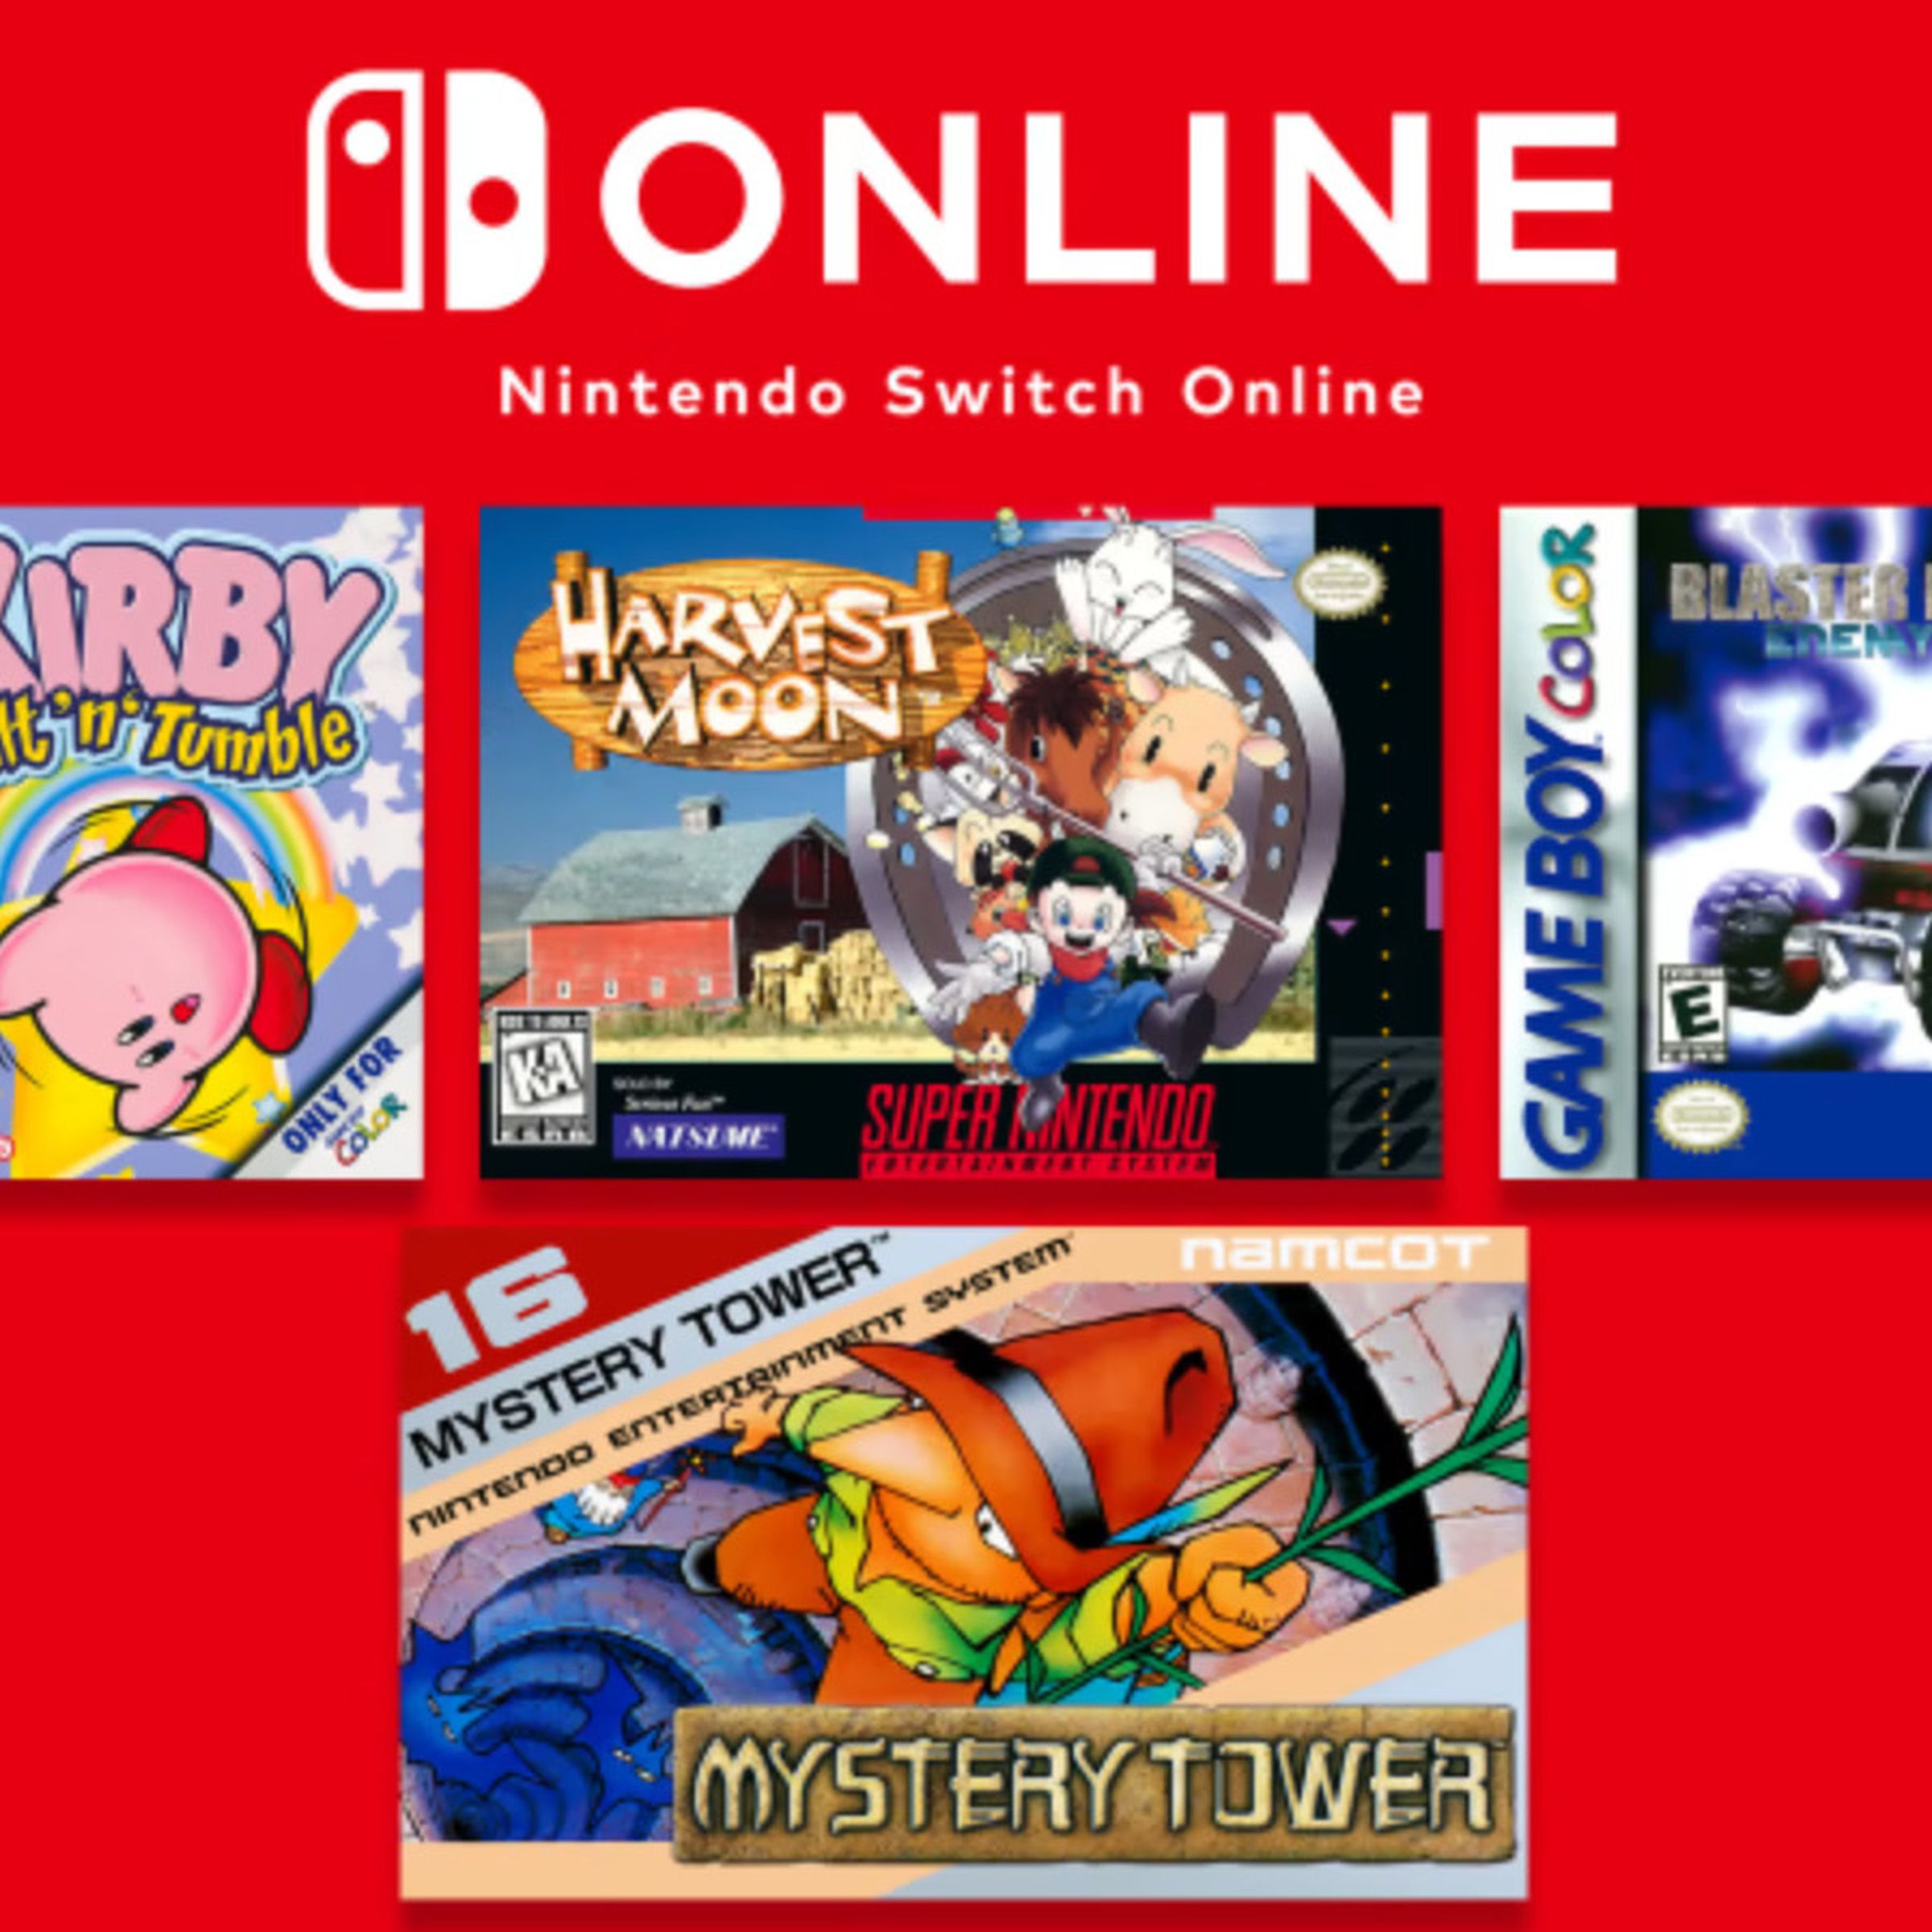 Four game covers showing the retro games coming to Switch this month.